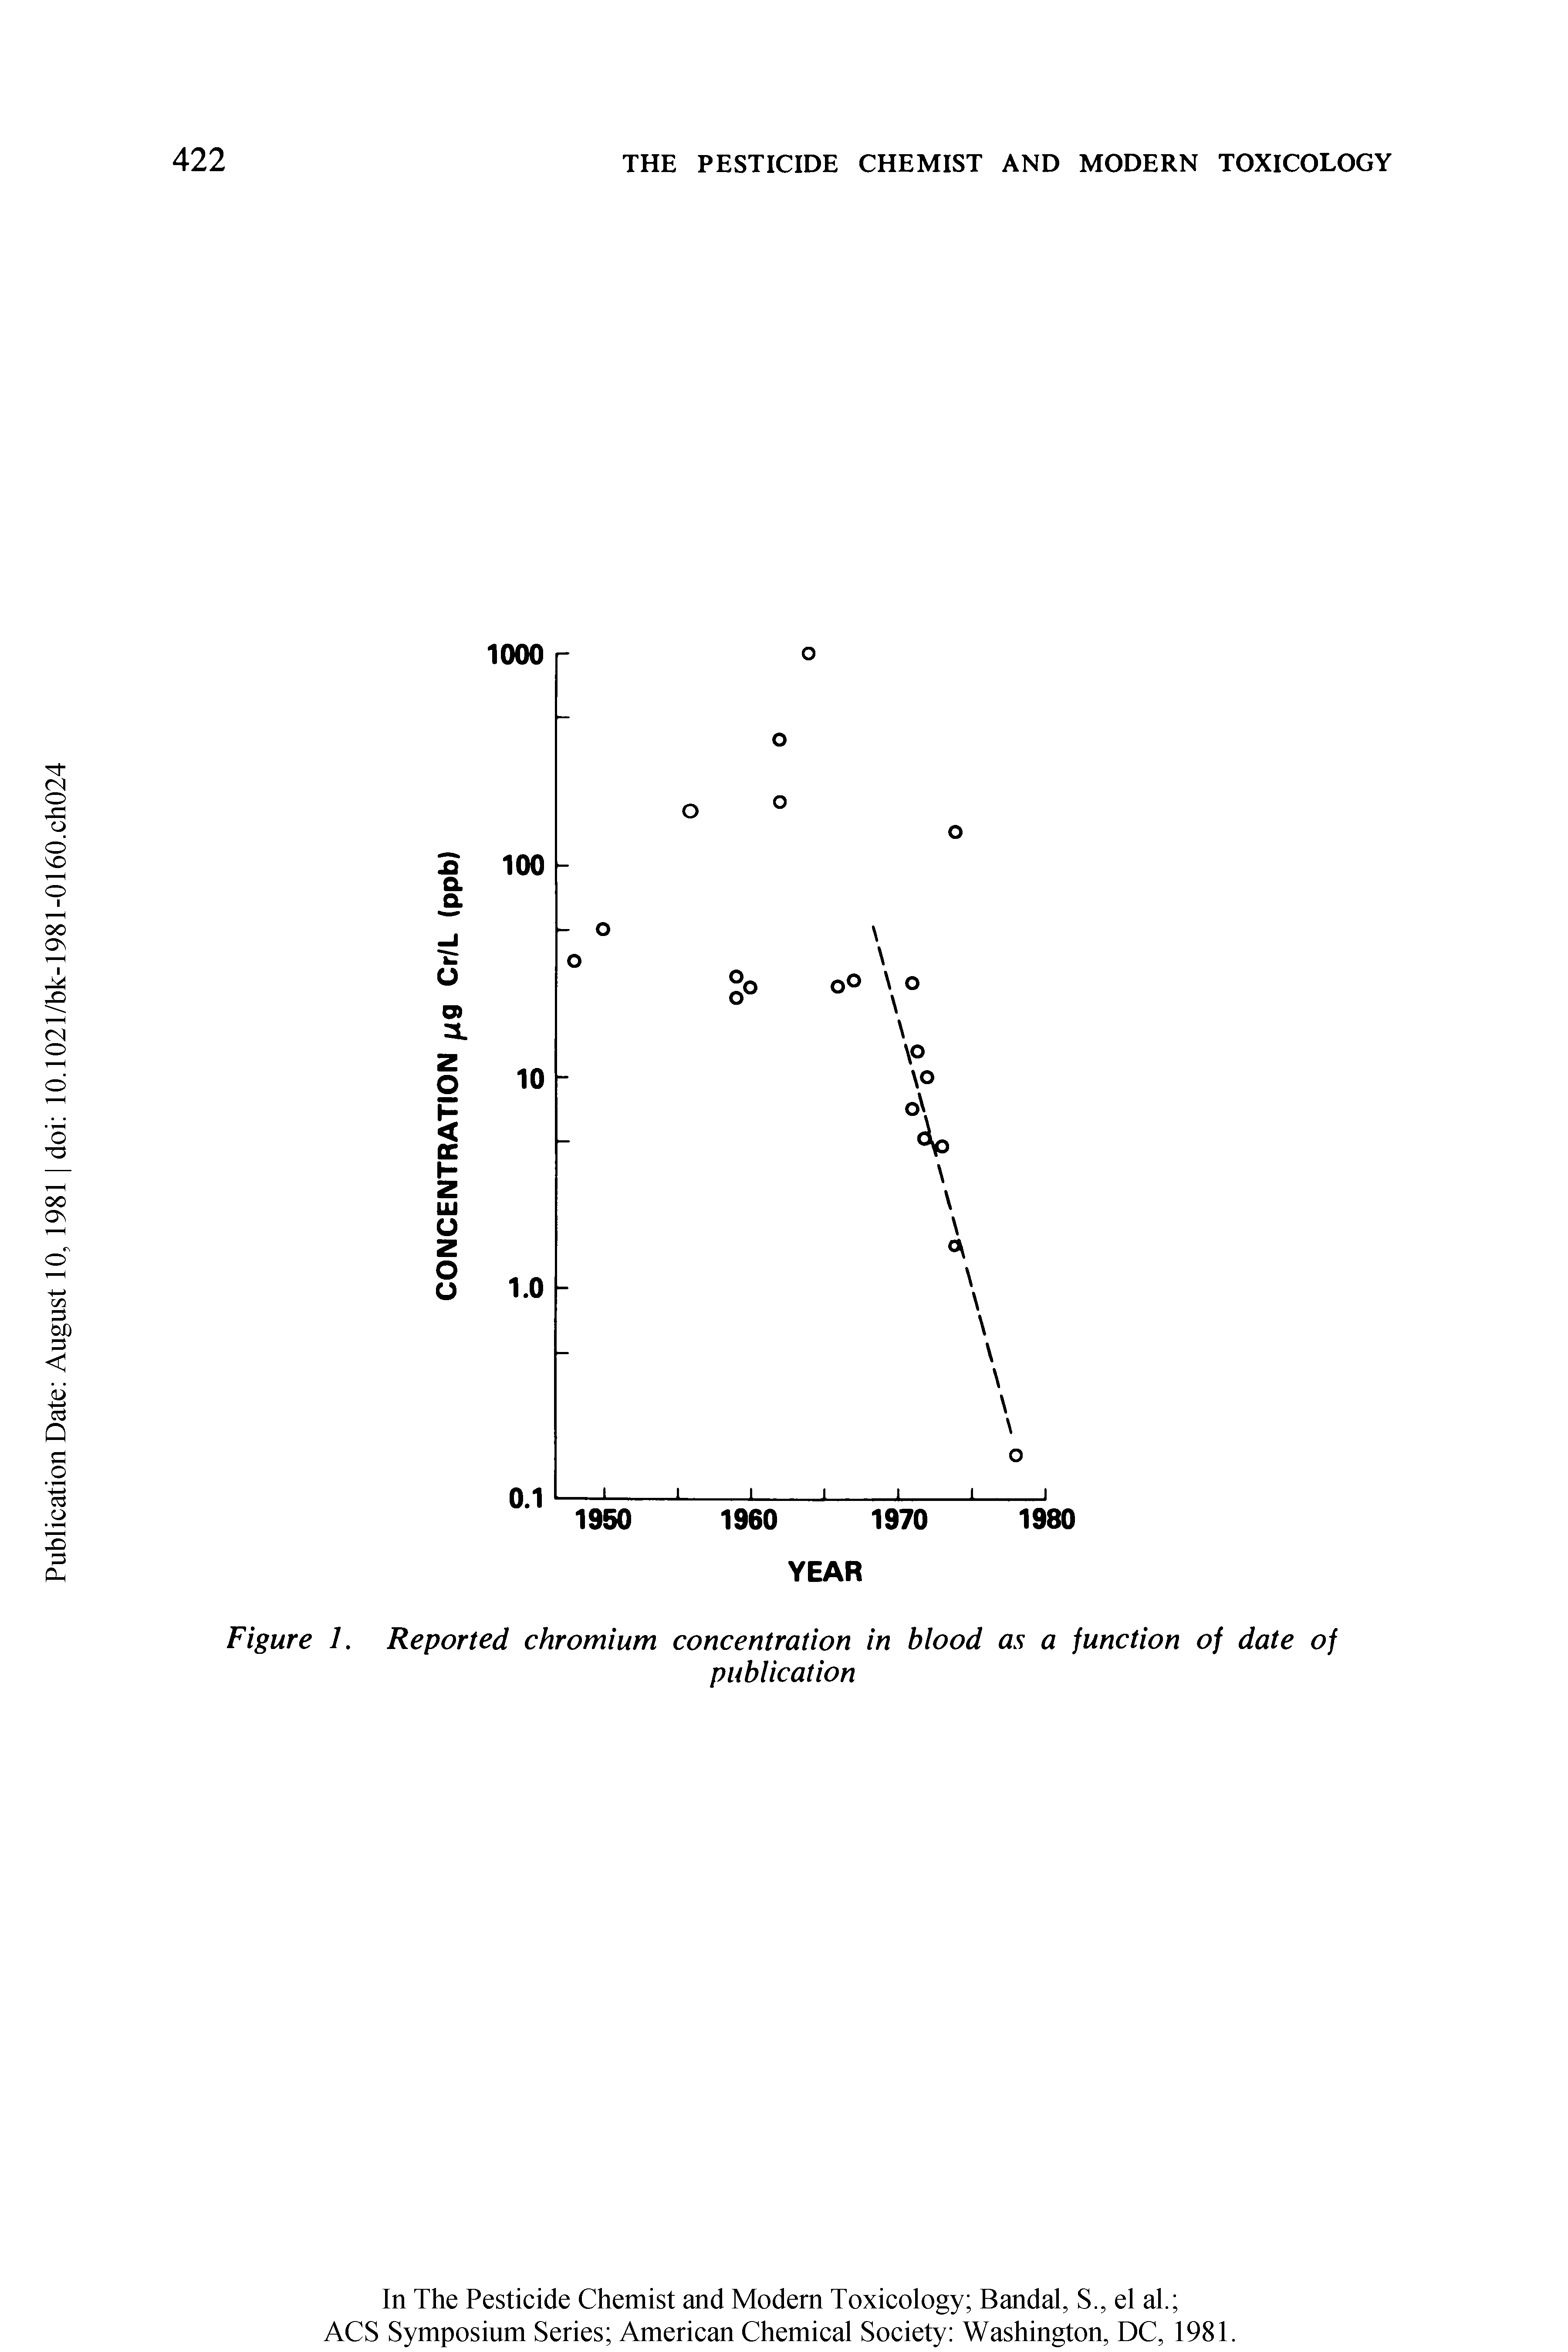 Figure 1. Reported chromium concentration in blood as a function of date of...